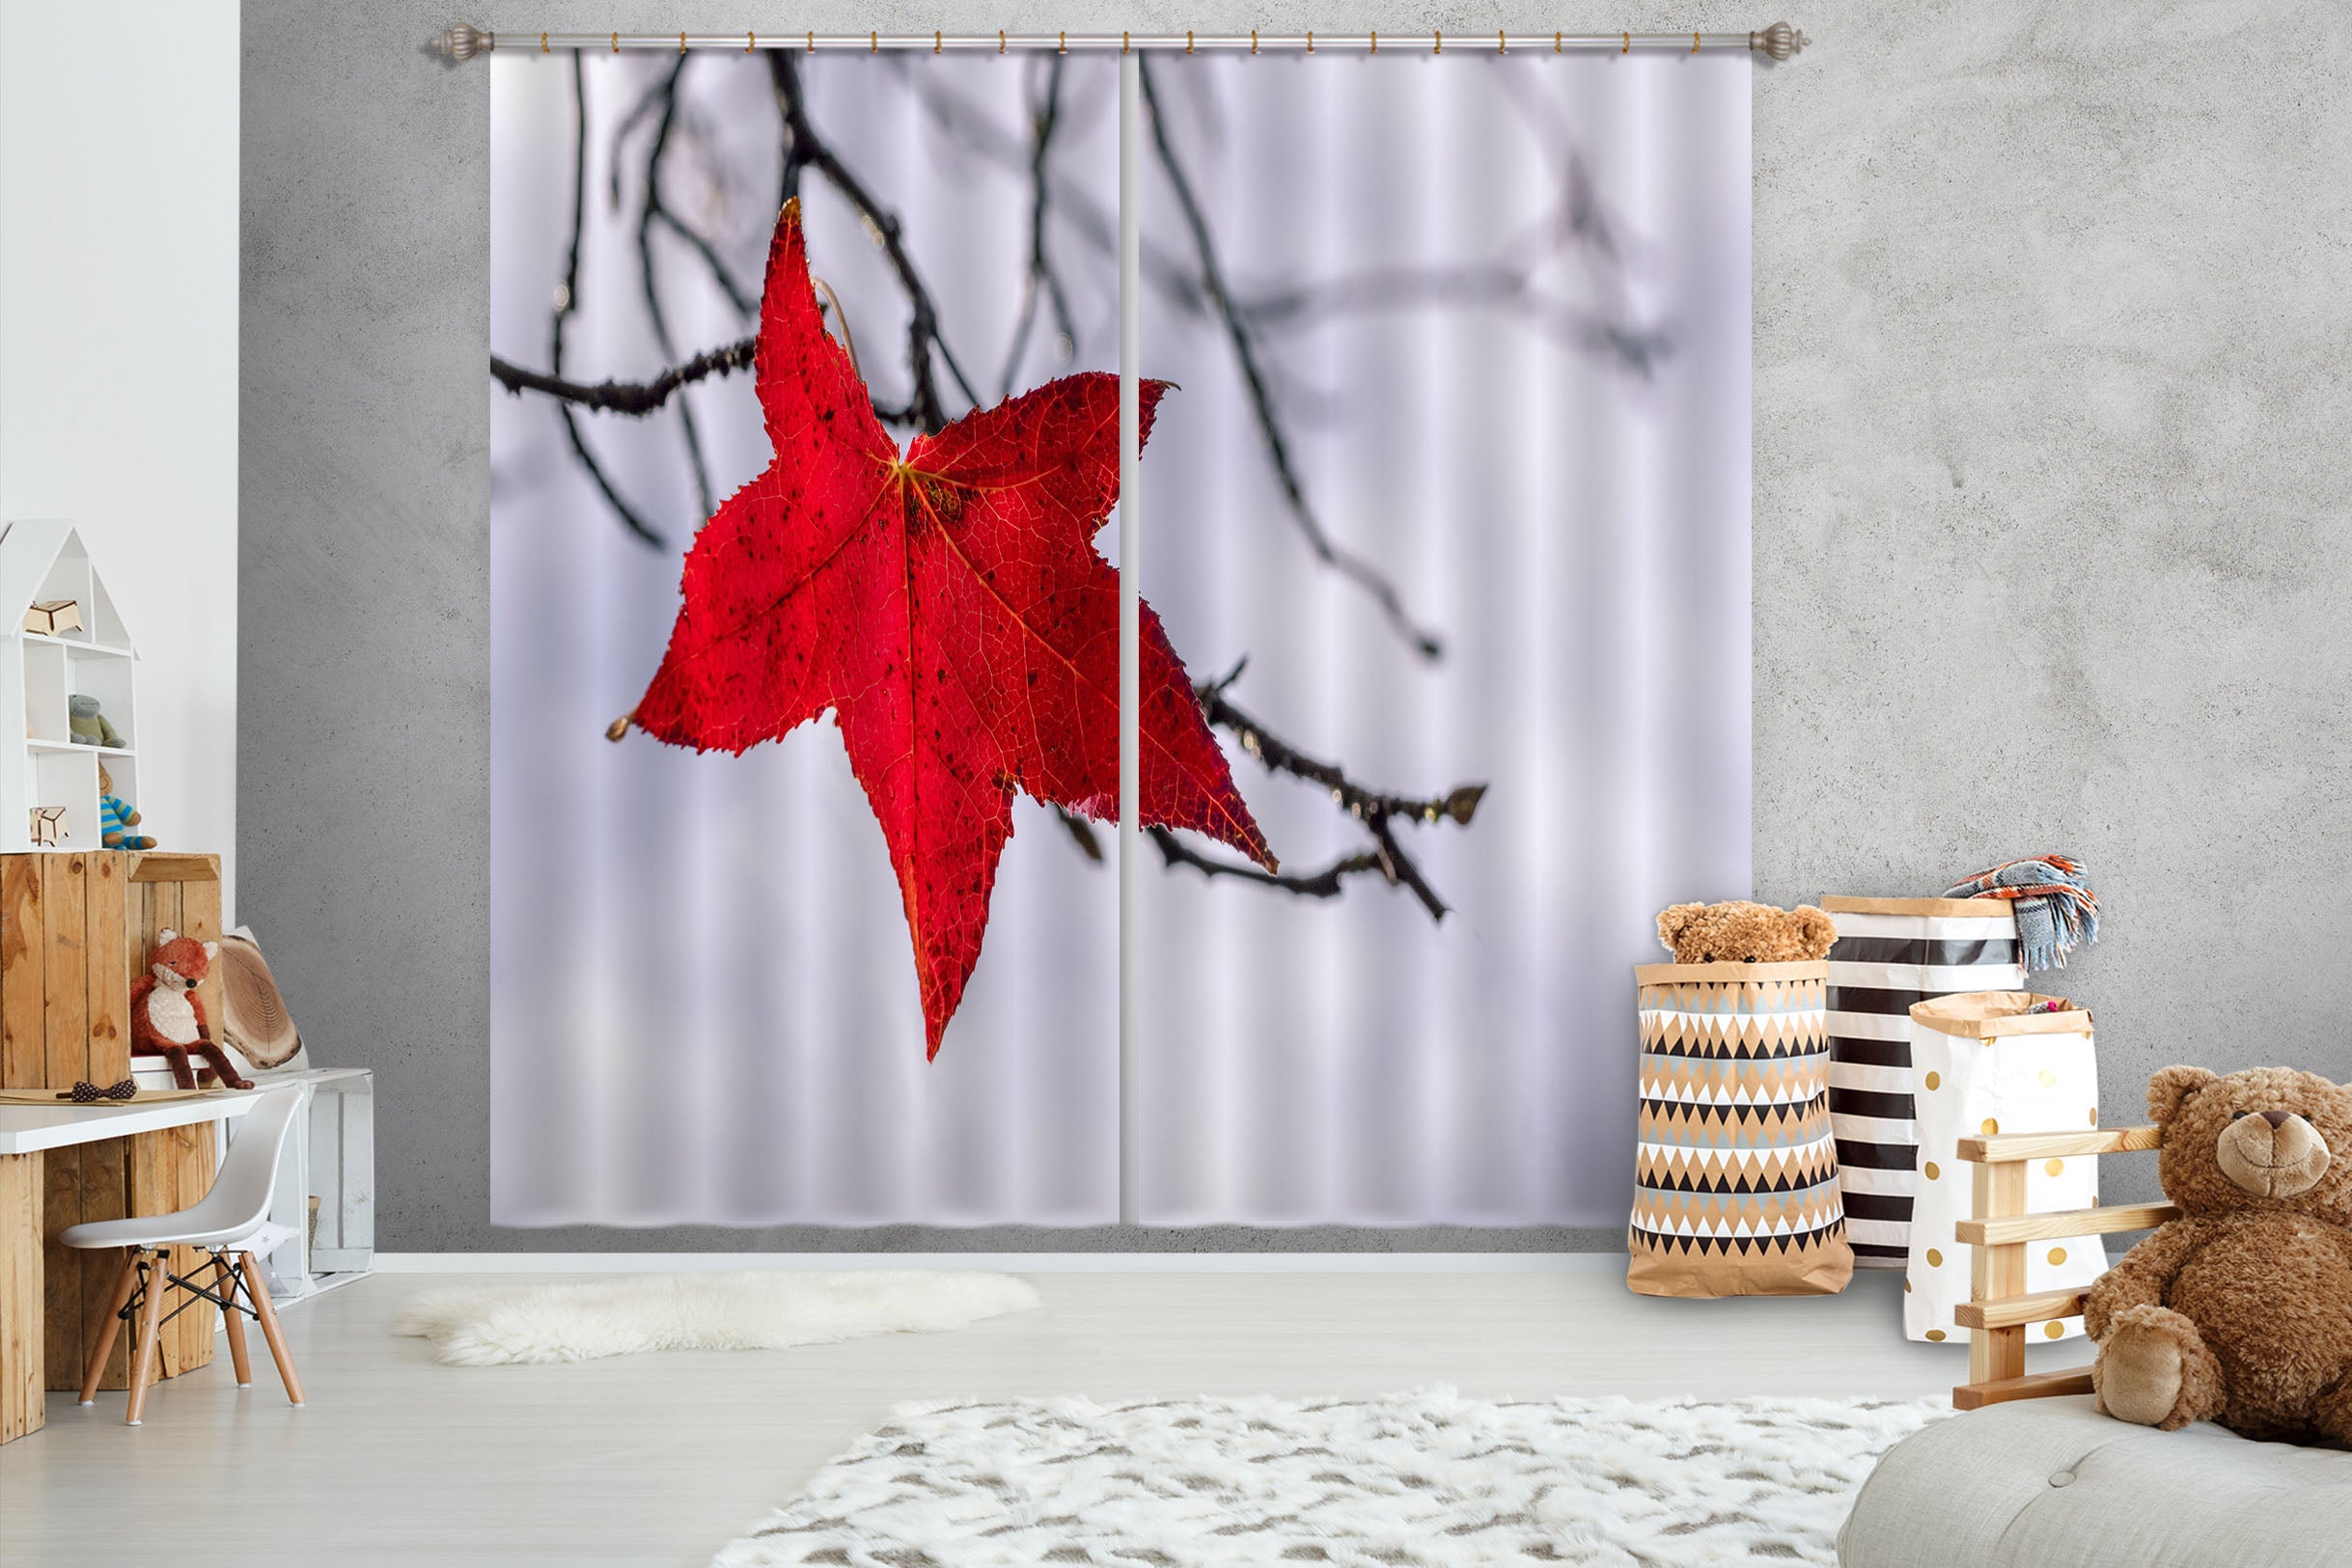 3D Red Maple Leaf 151 Marco Carmassi Curtain Curtains Drapes